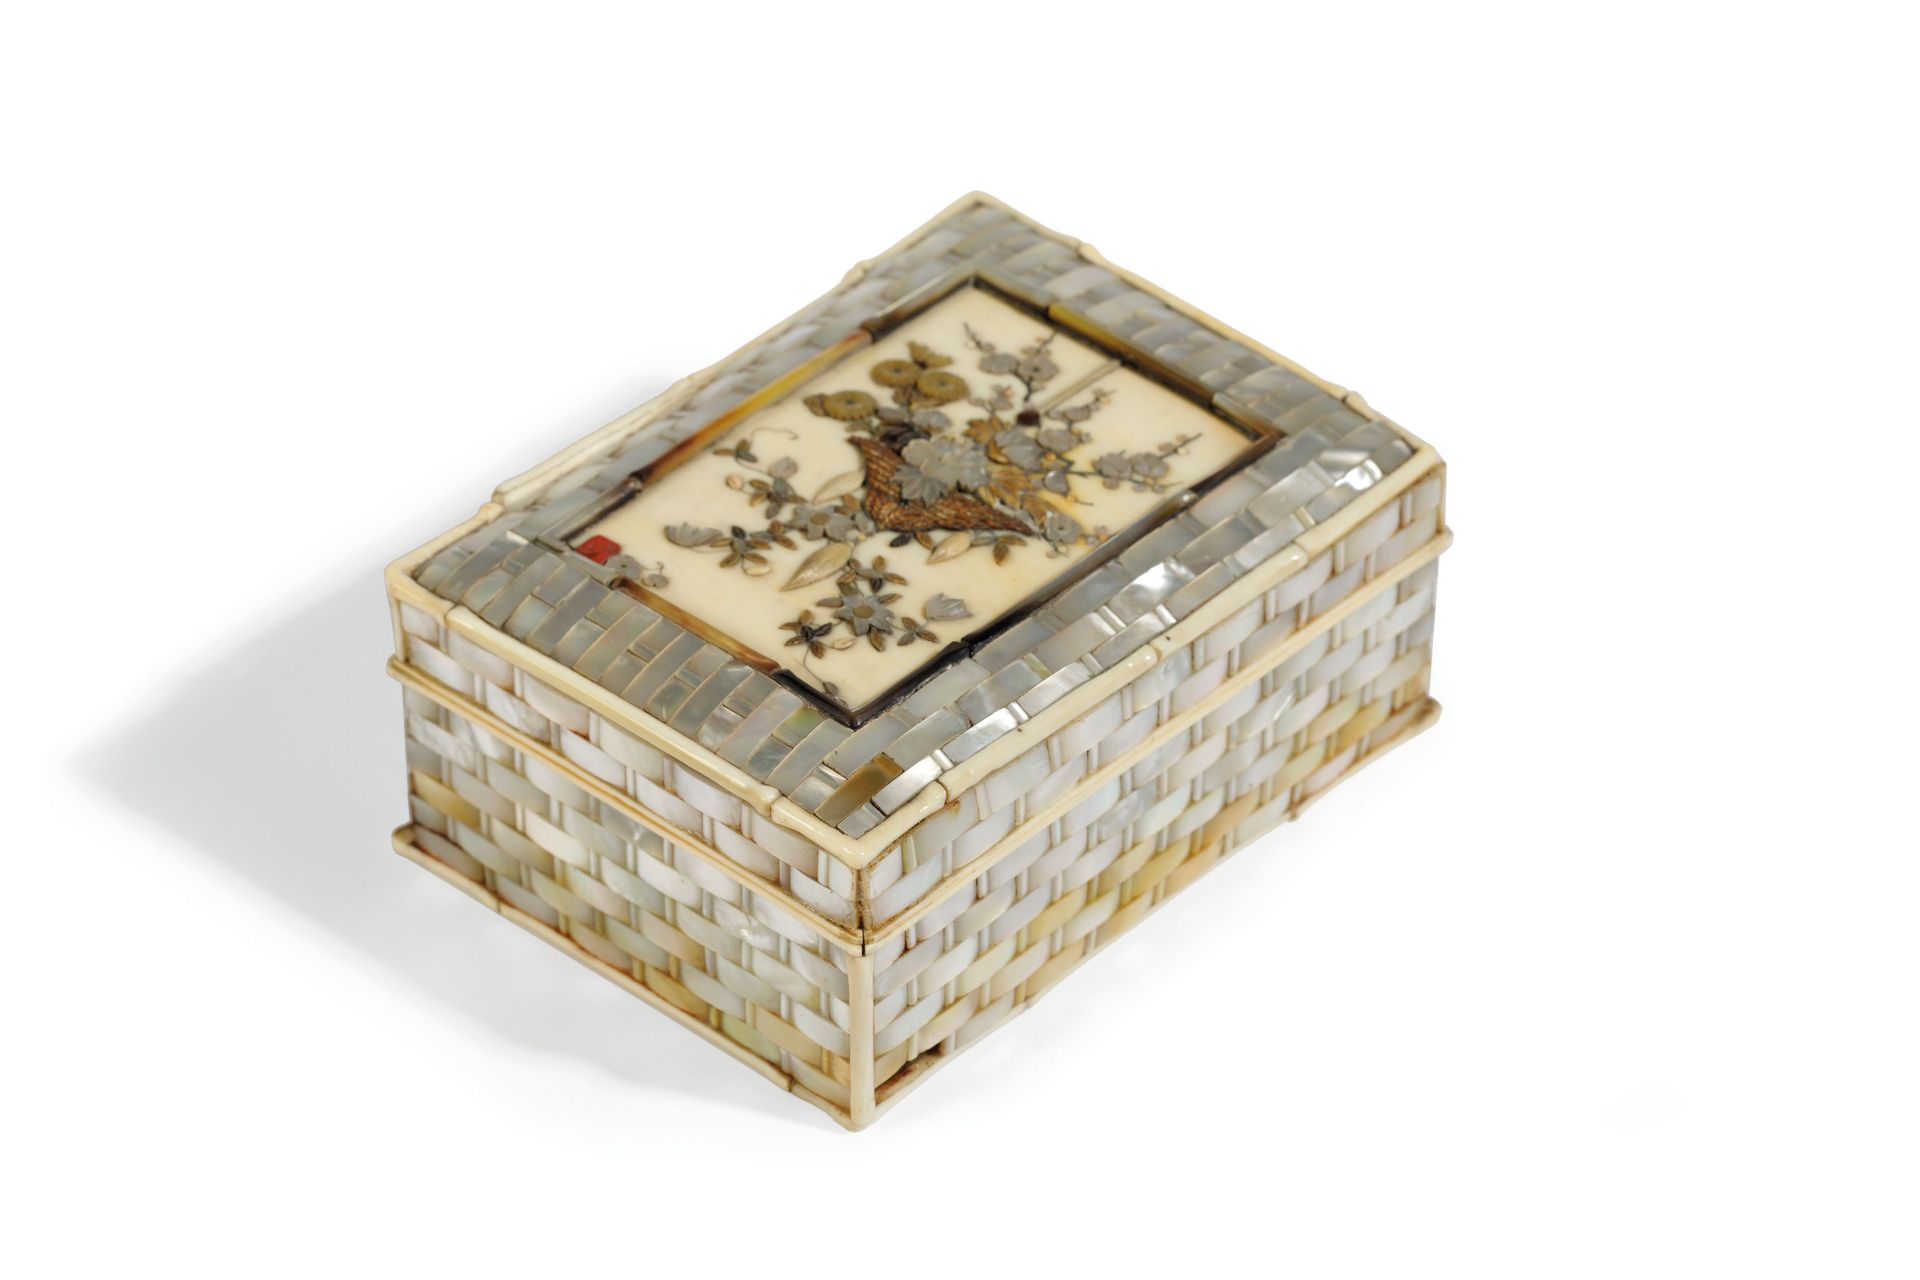 A SHIBAYAMA INLAID IVORY, MOTHER-OF-PEARL AND WOOD BOX AND COVER, MEIJI PERIOD, 19TH CENTURY